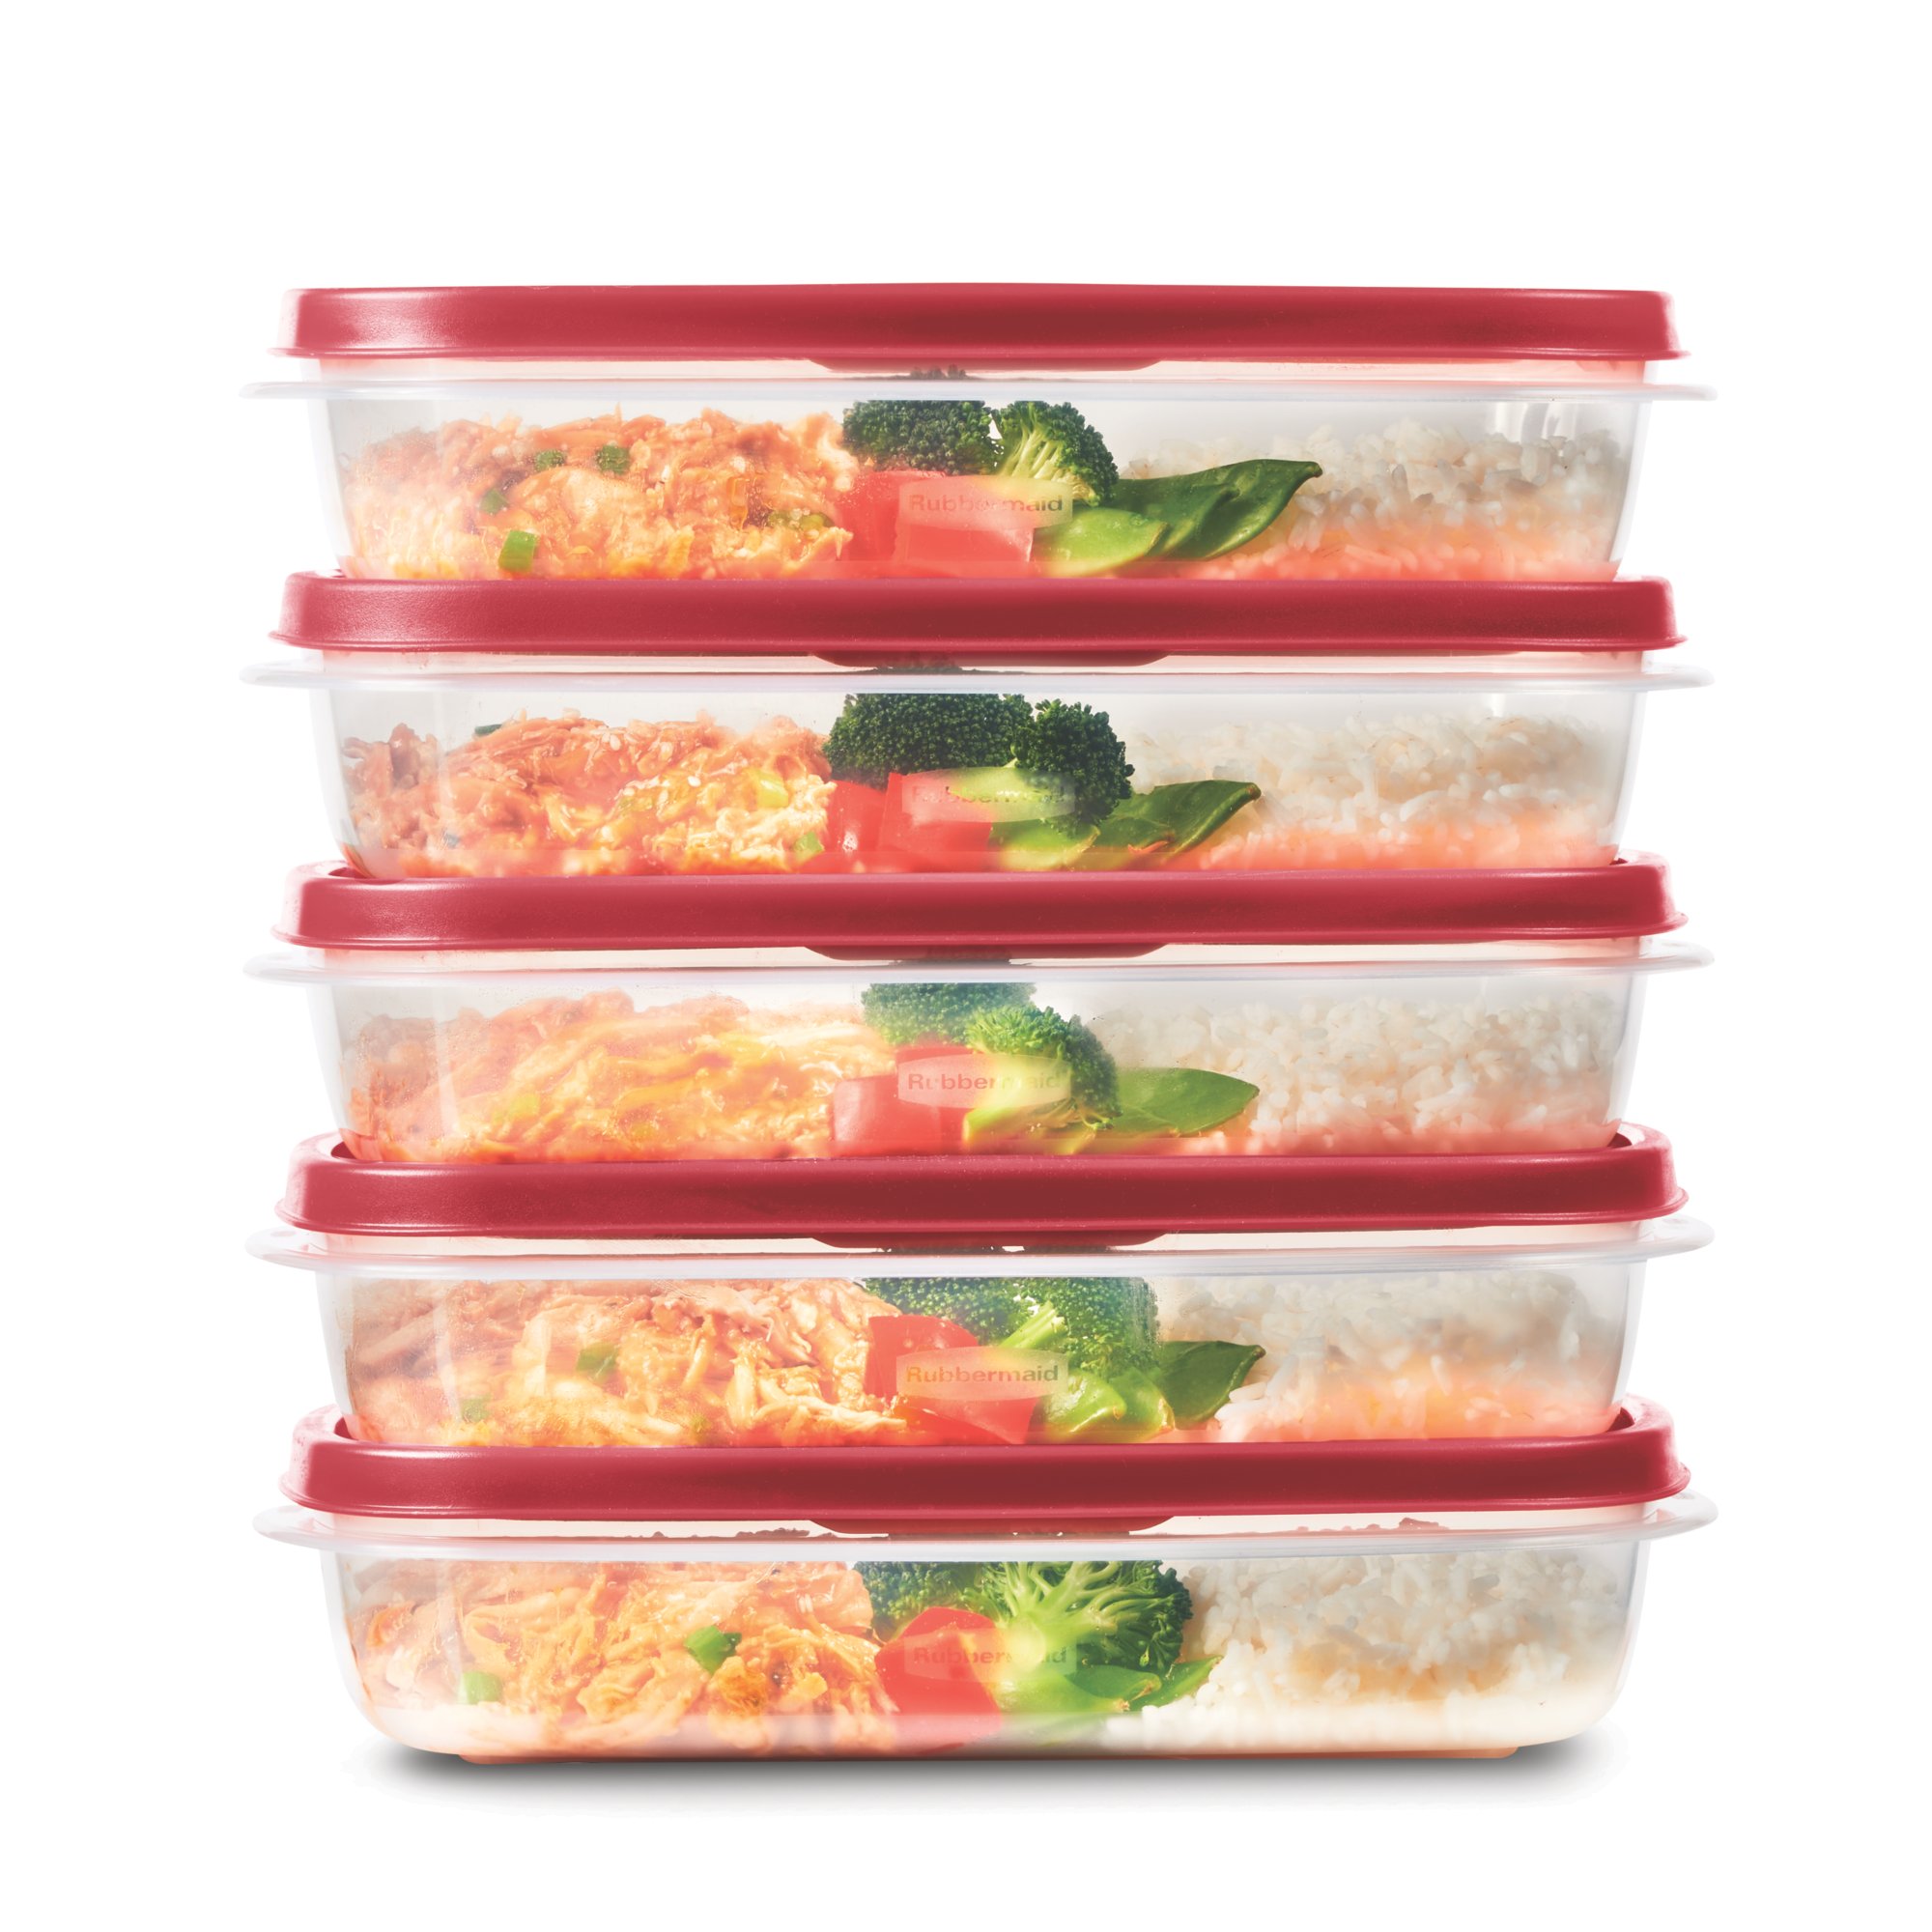 Pyrex MealBox Storage 5.5 Cup Rectangle Storage Container with